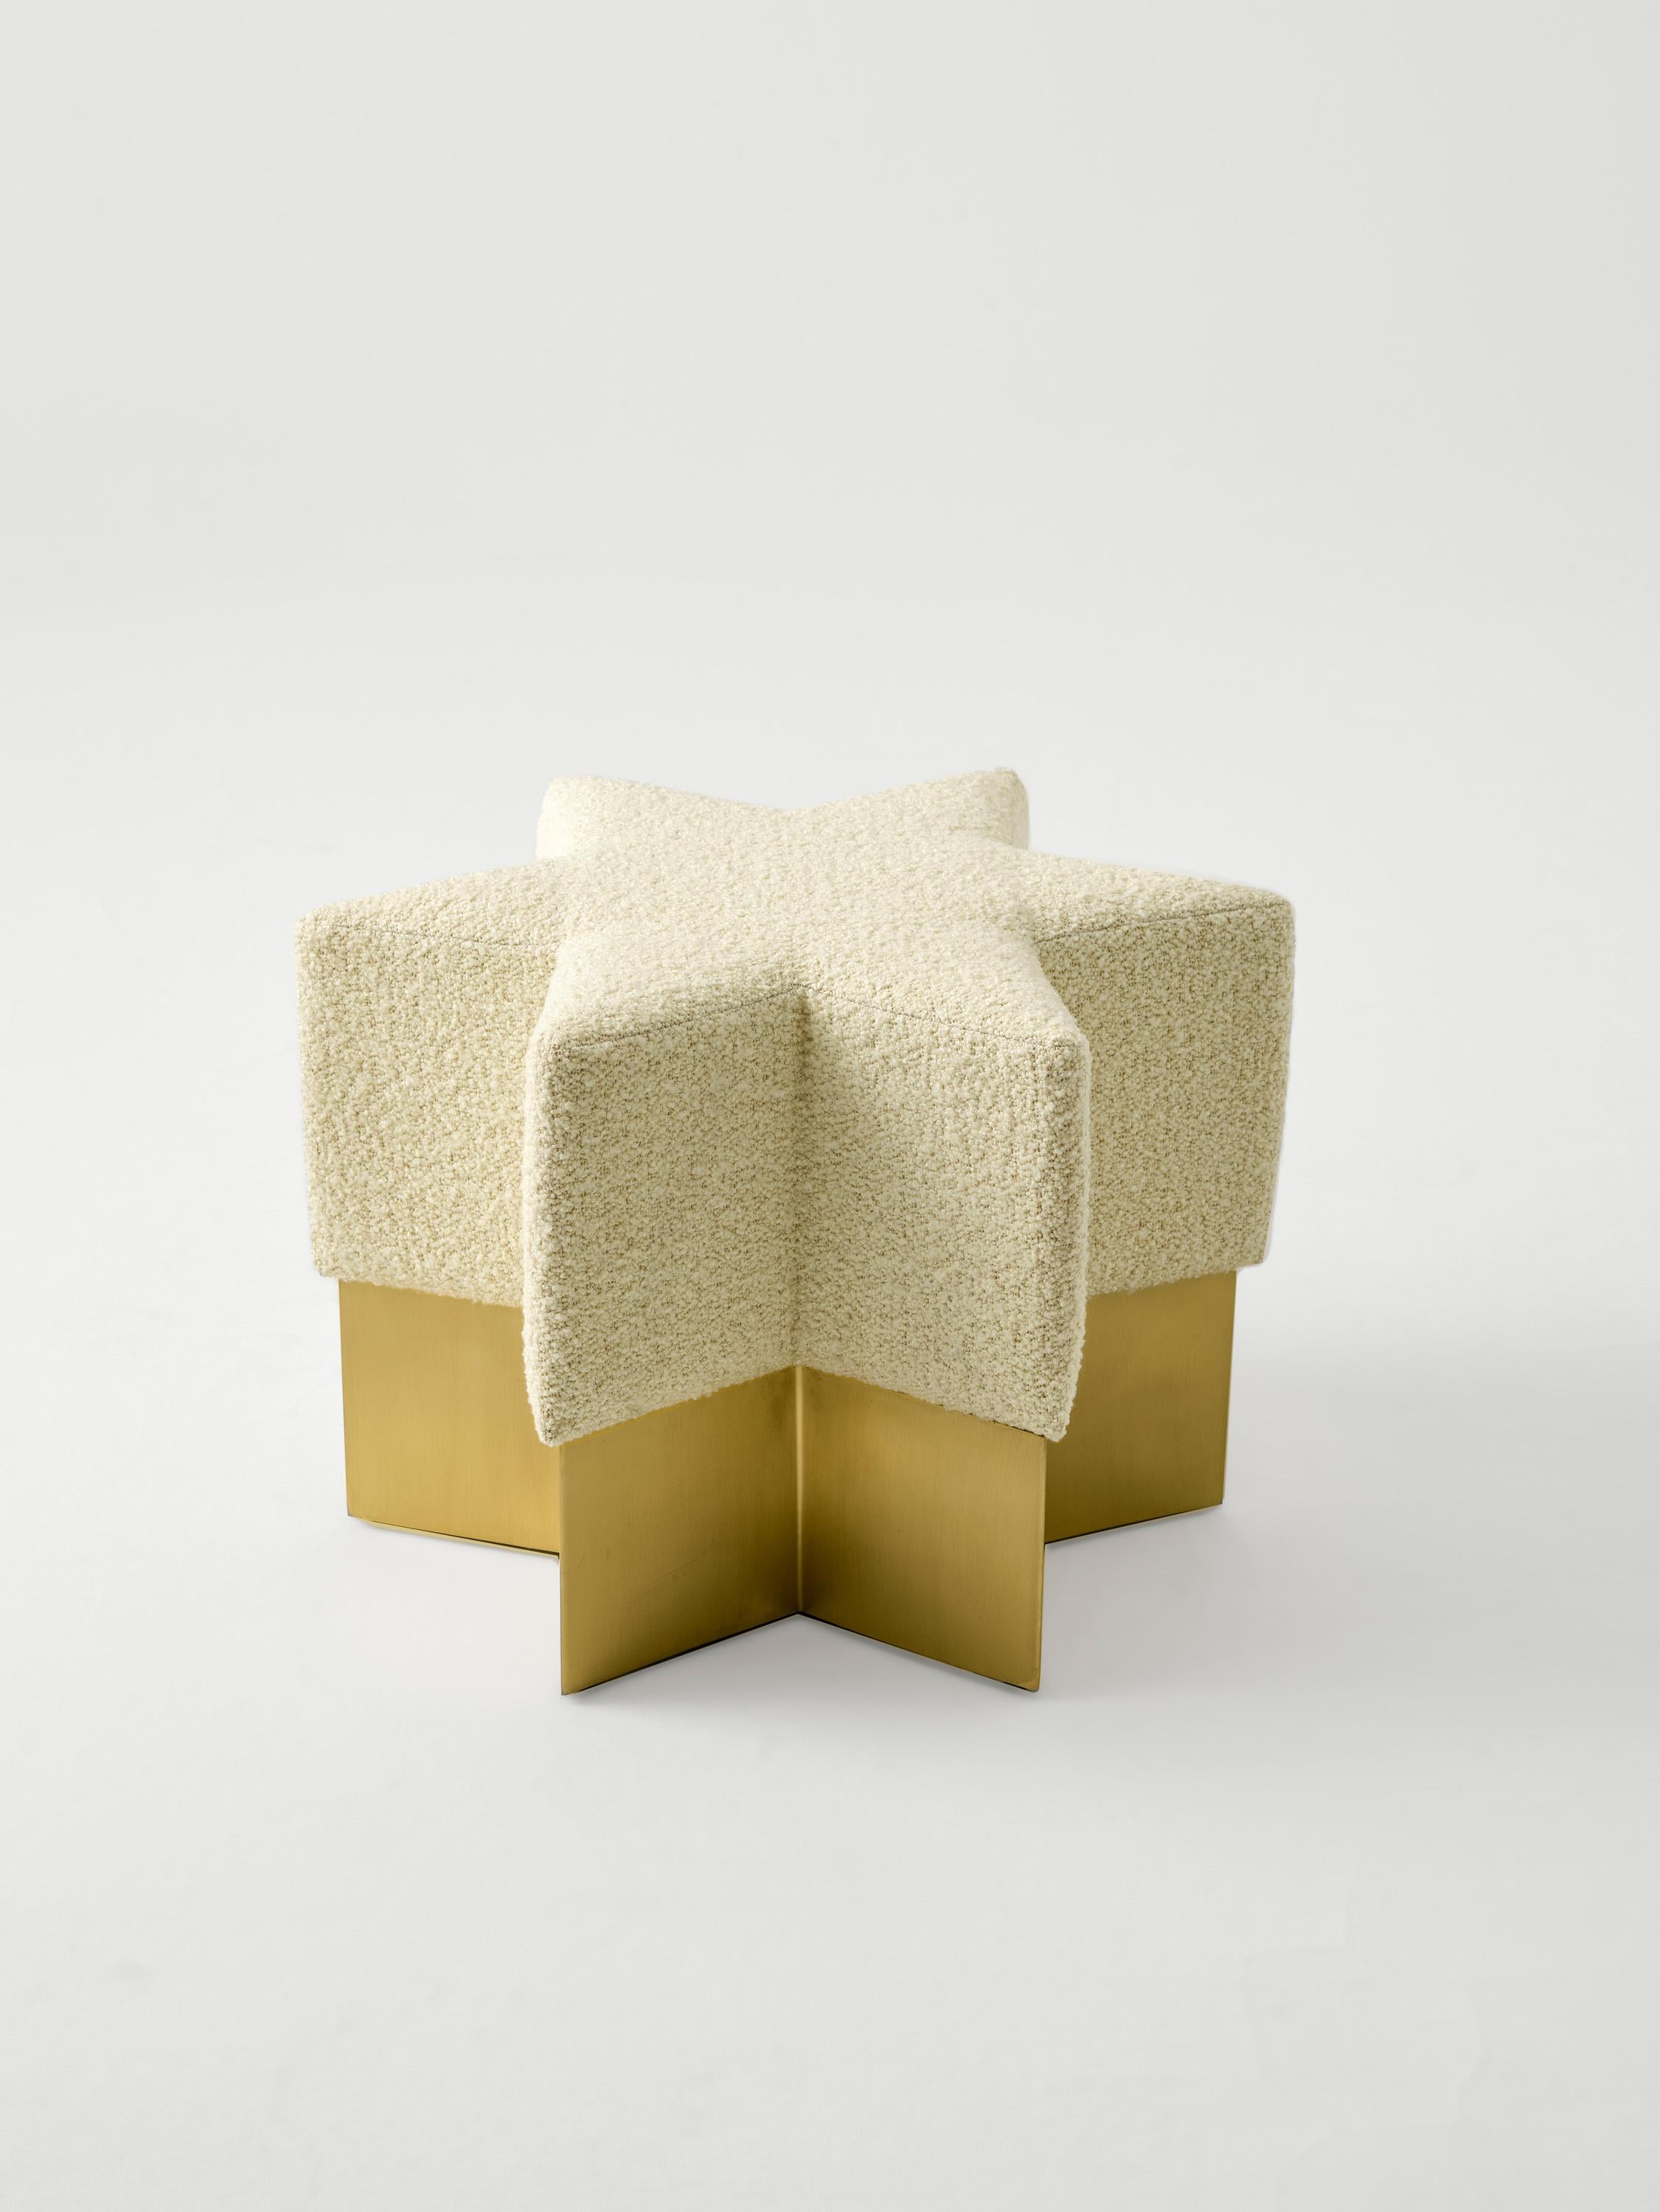 “Starboy Pouf” is inspired by the celestial sphere. It is a metaphorical object from the skies which has been projected to the observer on earth. The cream colored boucle and matte brass base of 